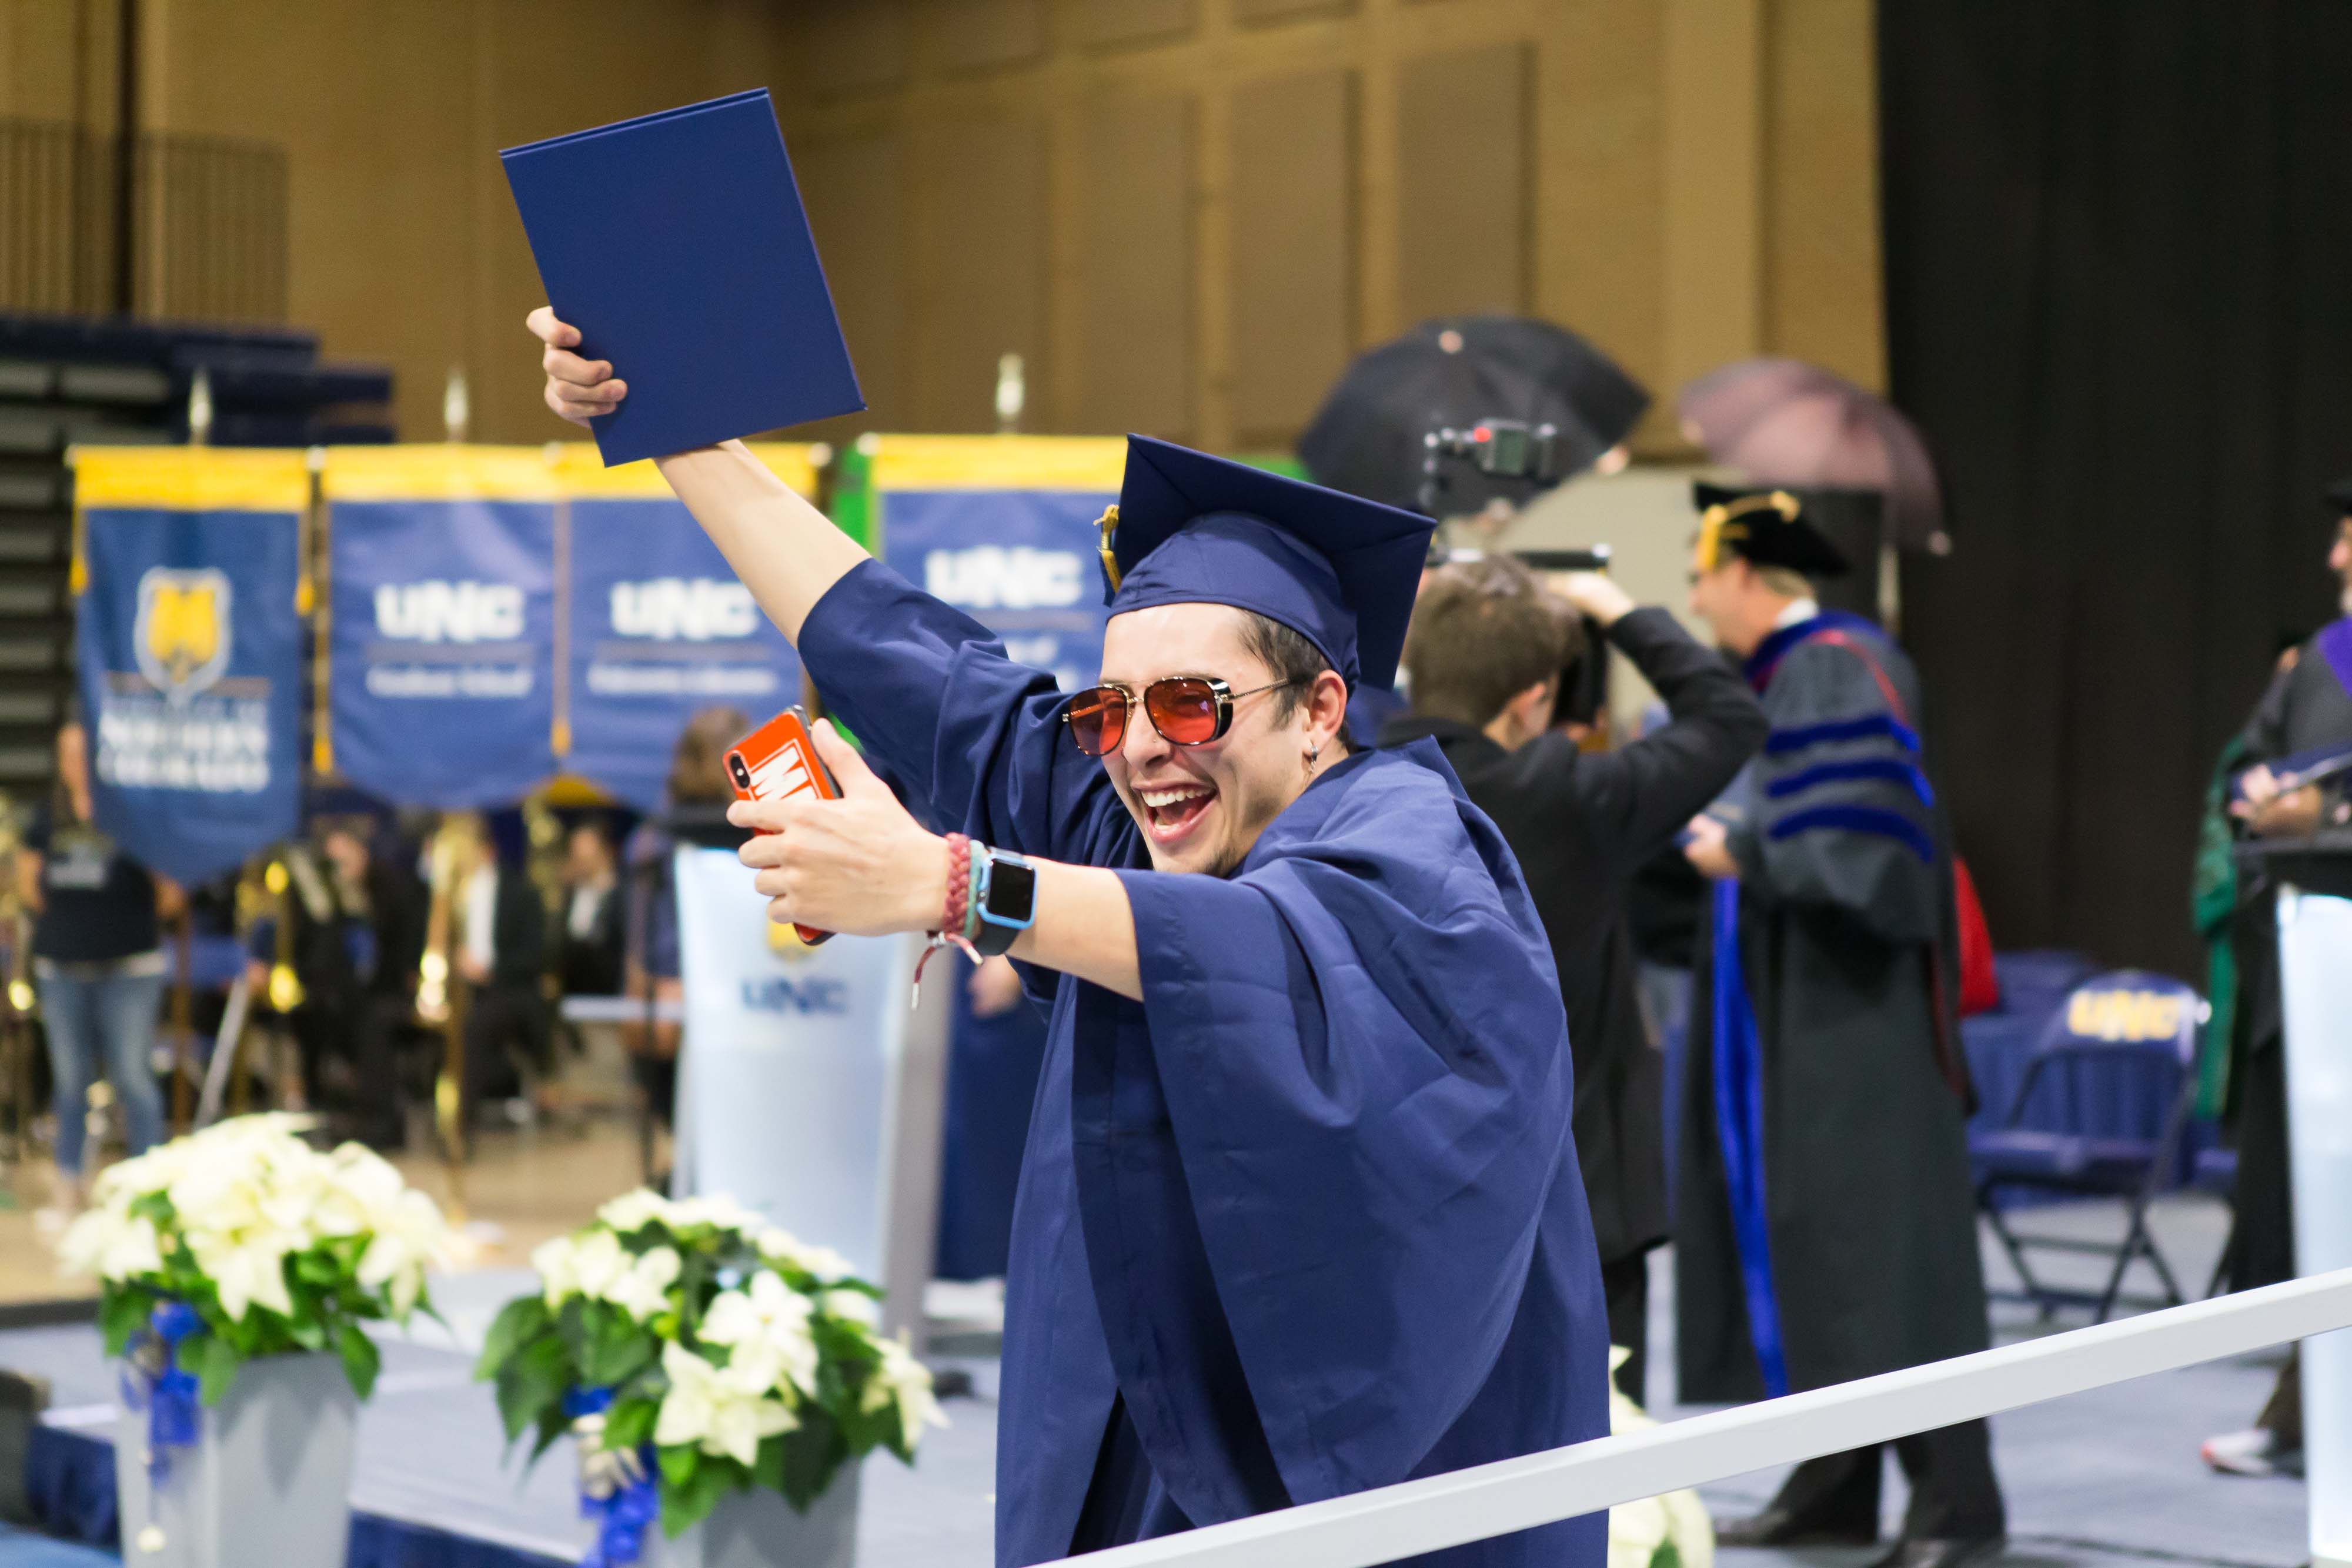 Student takes selfie with diploma